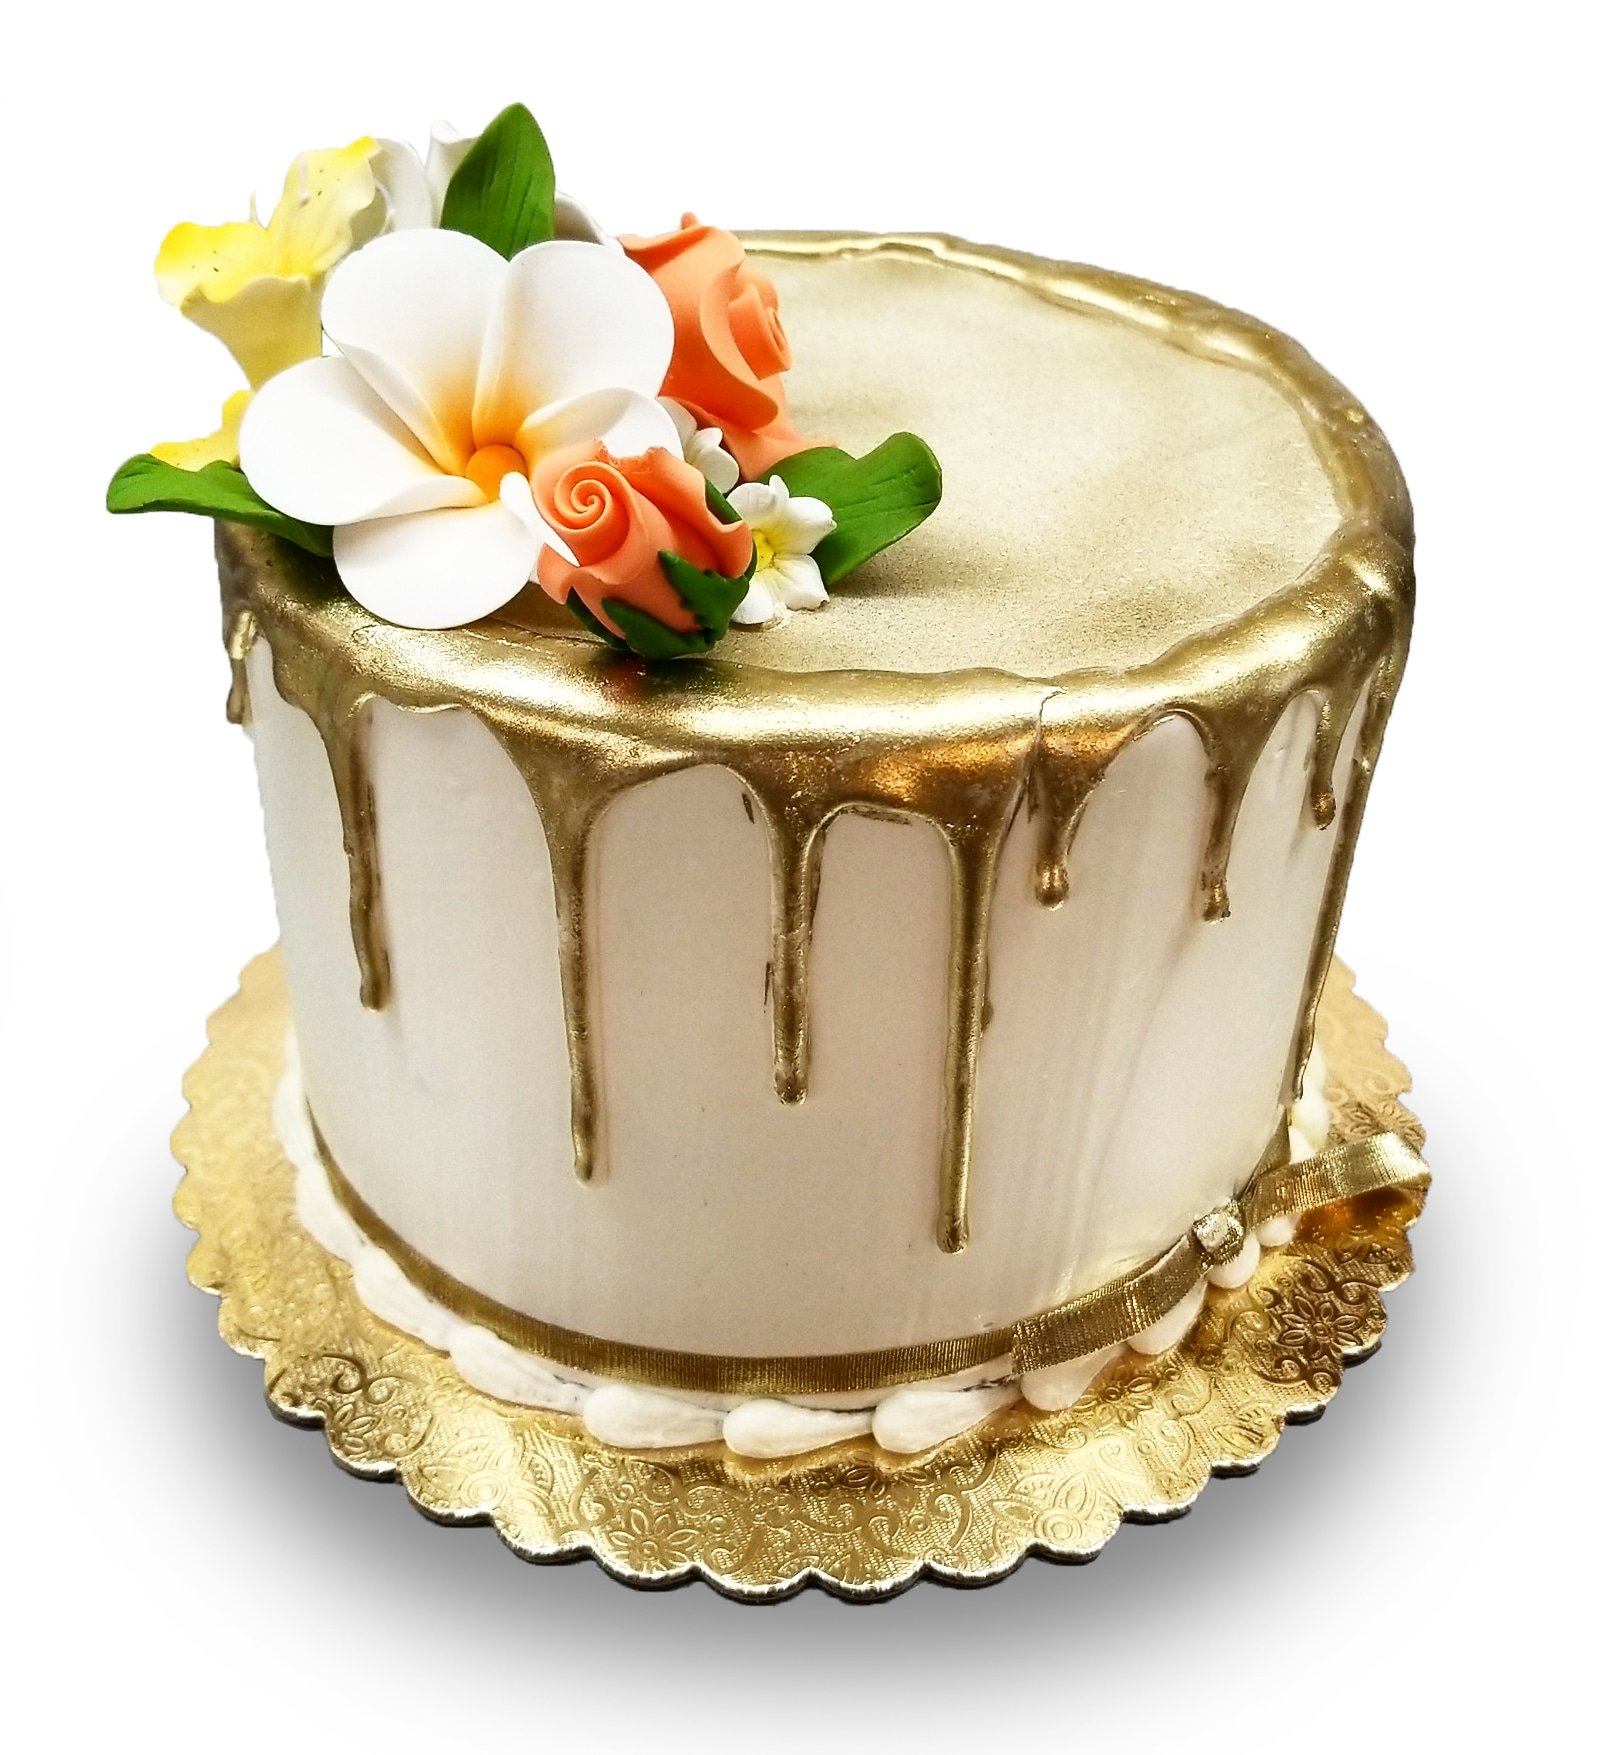 AB003. Assorted gumpaste flowers and dripping gold chocolate birthday cake